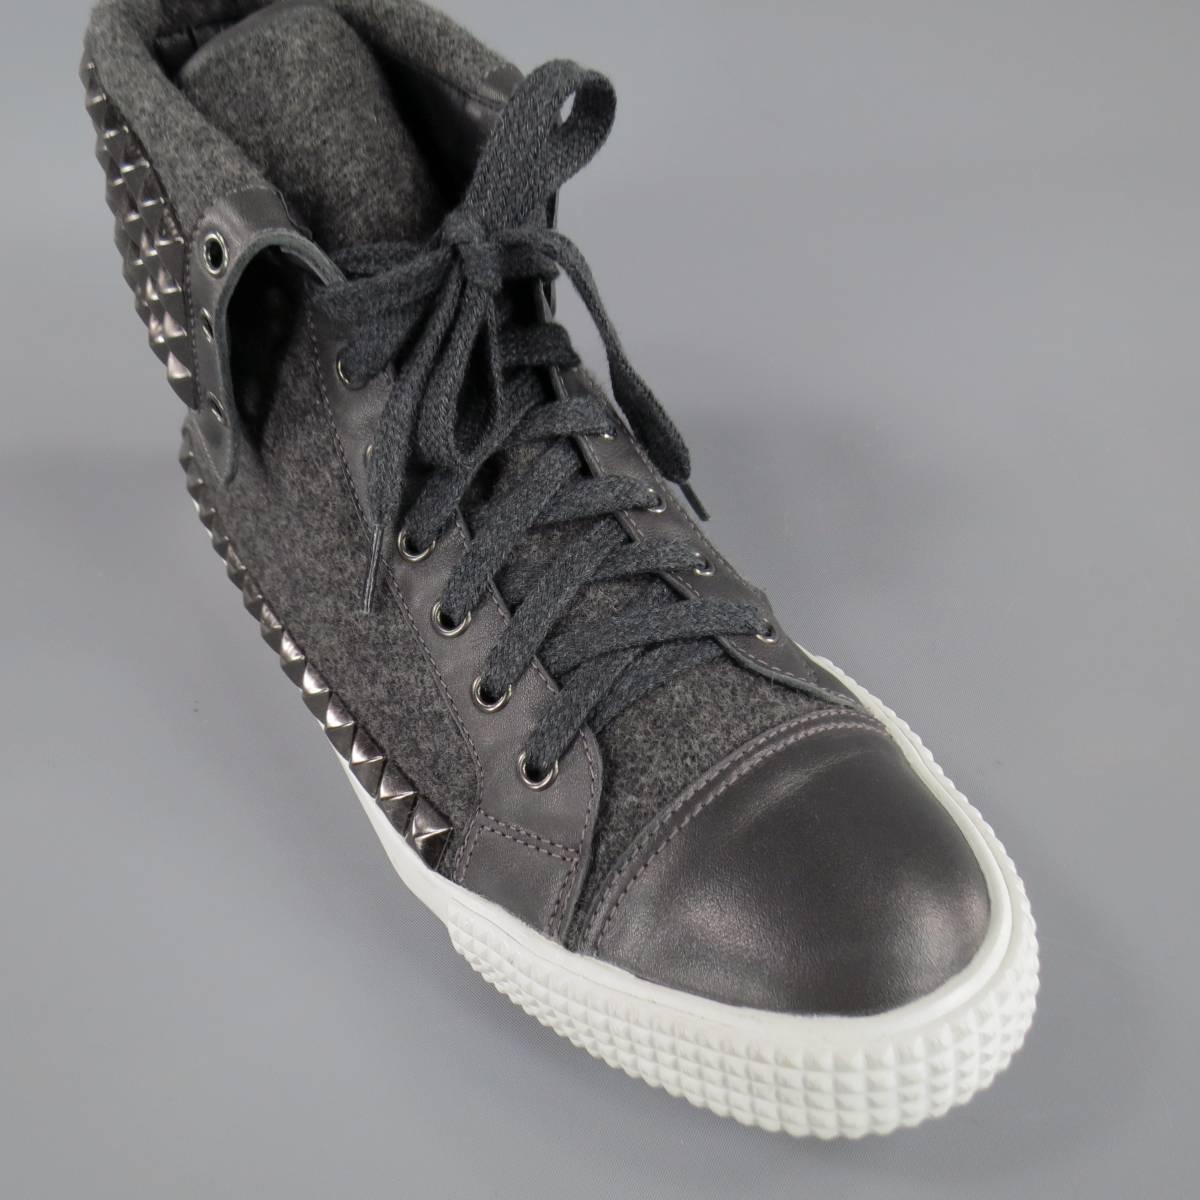 Jimmy Choo Spencer Charcoal Wool Studded Flap High Top Men's Sneaker, Size 12  5